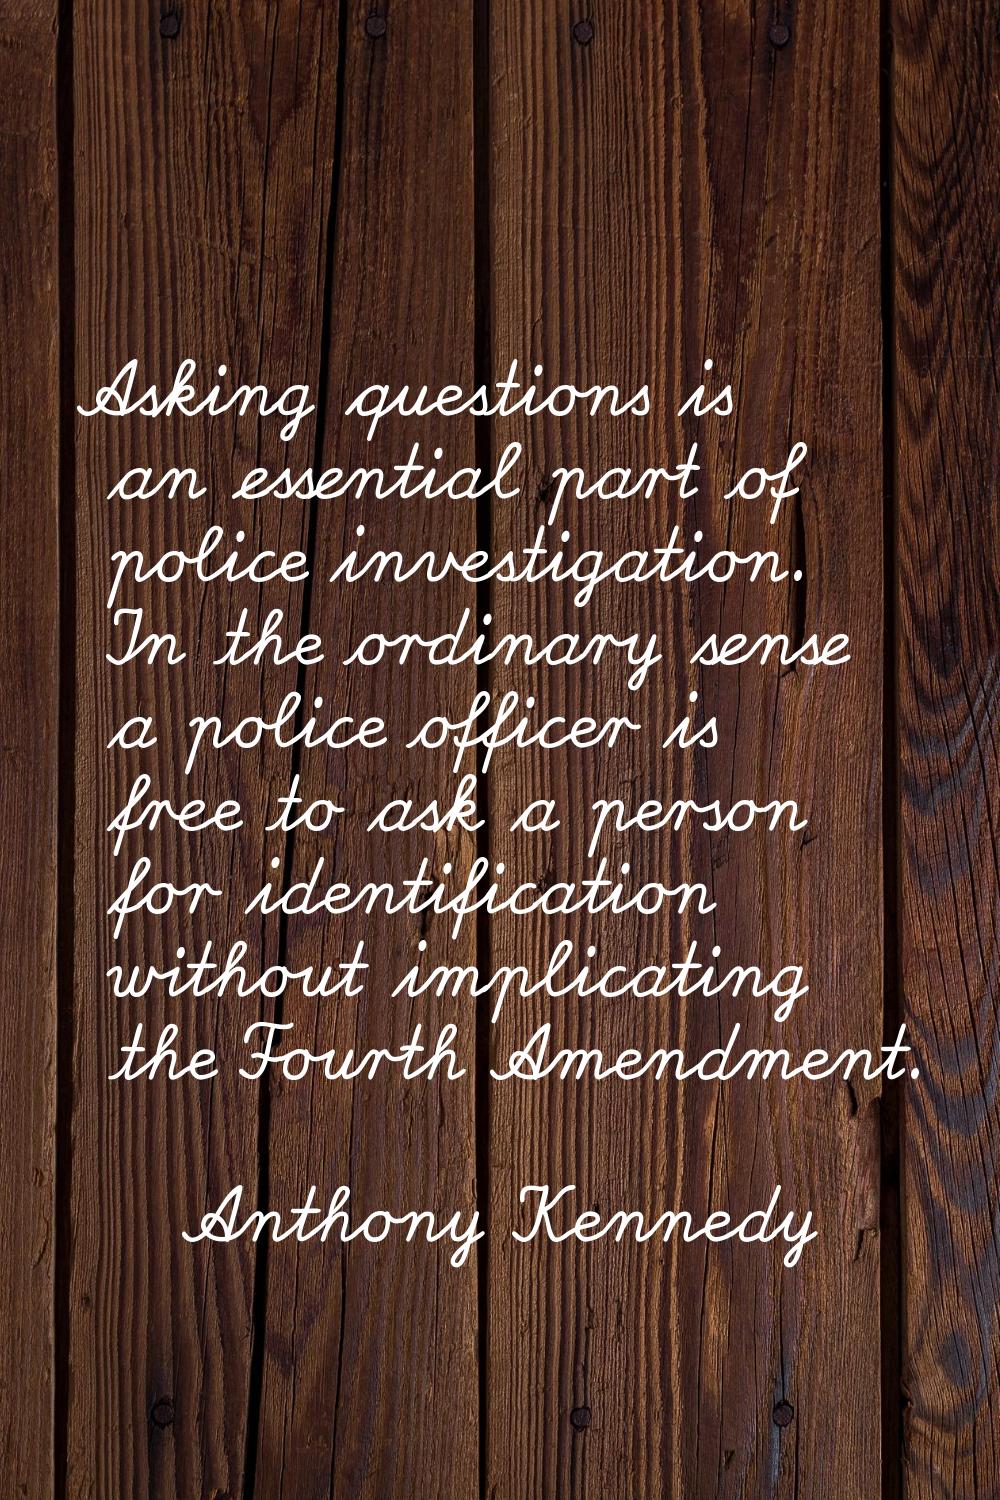 Asking questions is an essential part of police investigation. In the ordinary sense a police offic